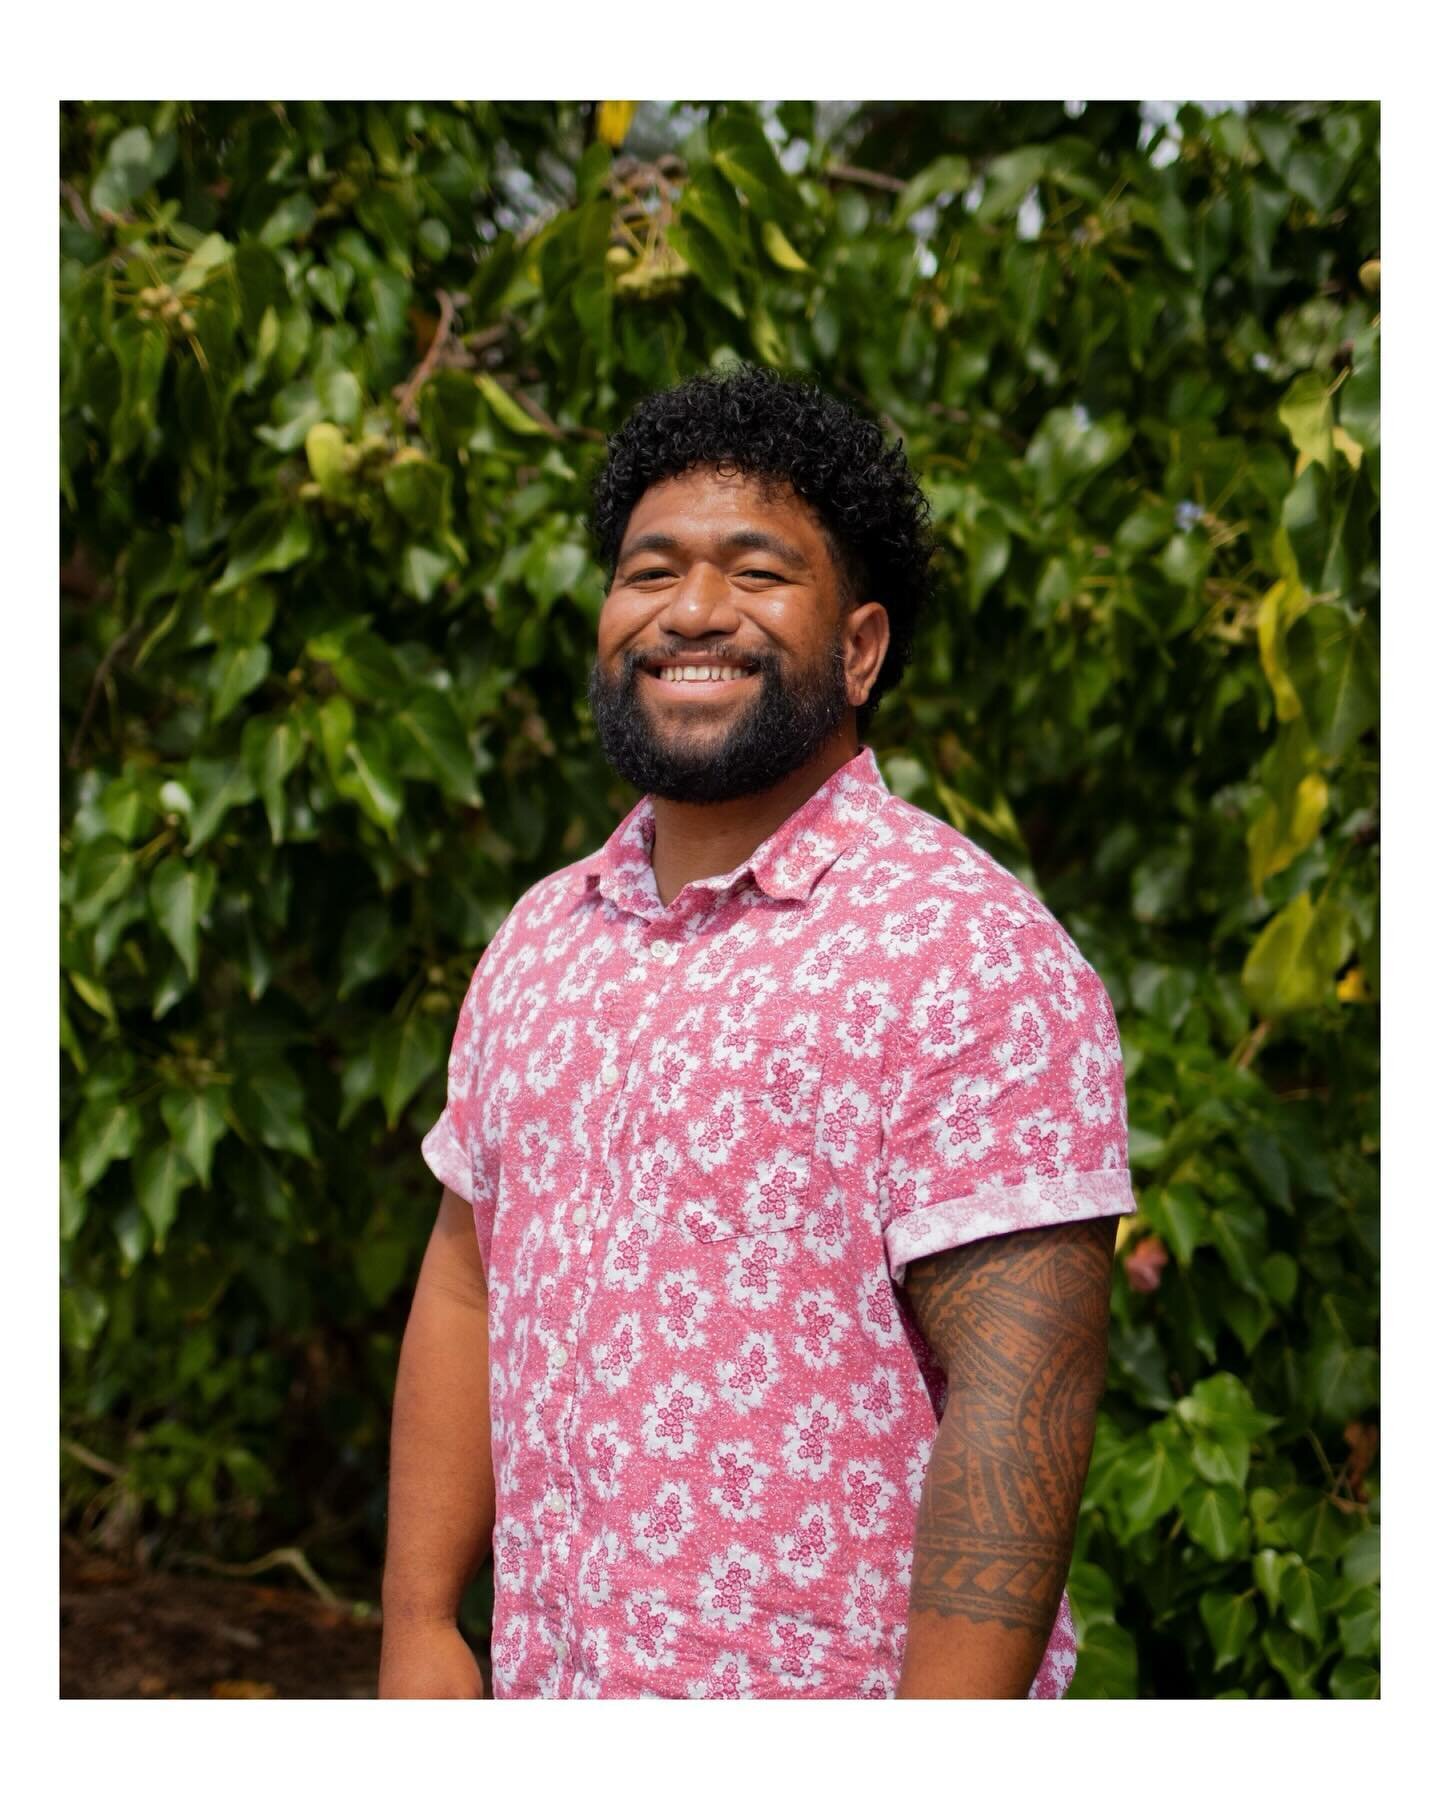 Meet one our Intern Ministry Leaders, interning in the Ministry Leader Development program for the year here in the beautiful Hawaii Islands! 🌺

Wilson Pio is an Intern Ministry leader on the island of Kuai currently training to become a pastor. Aft